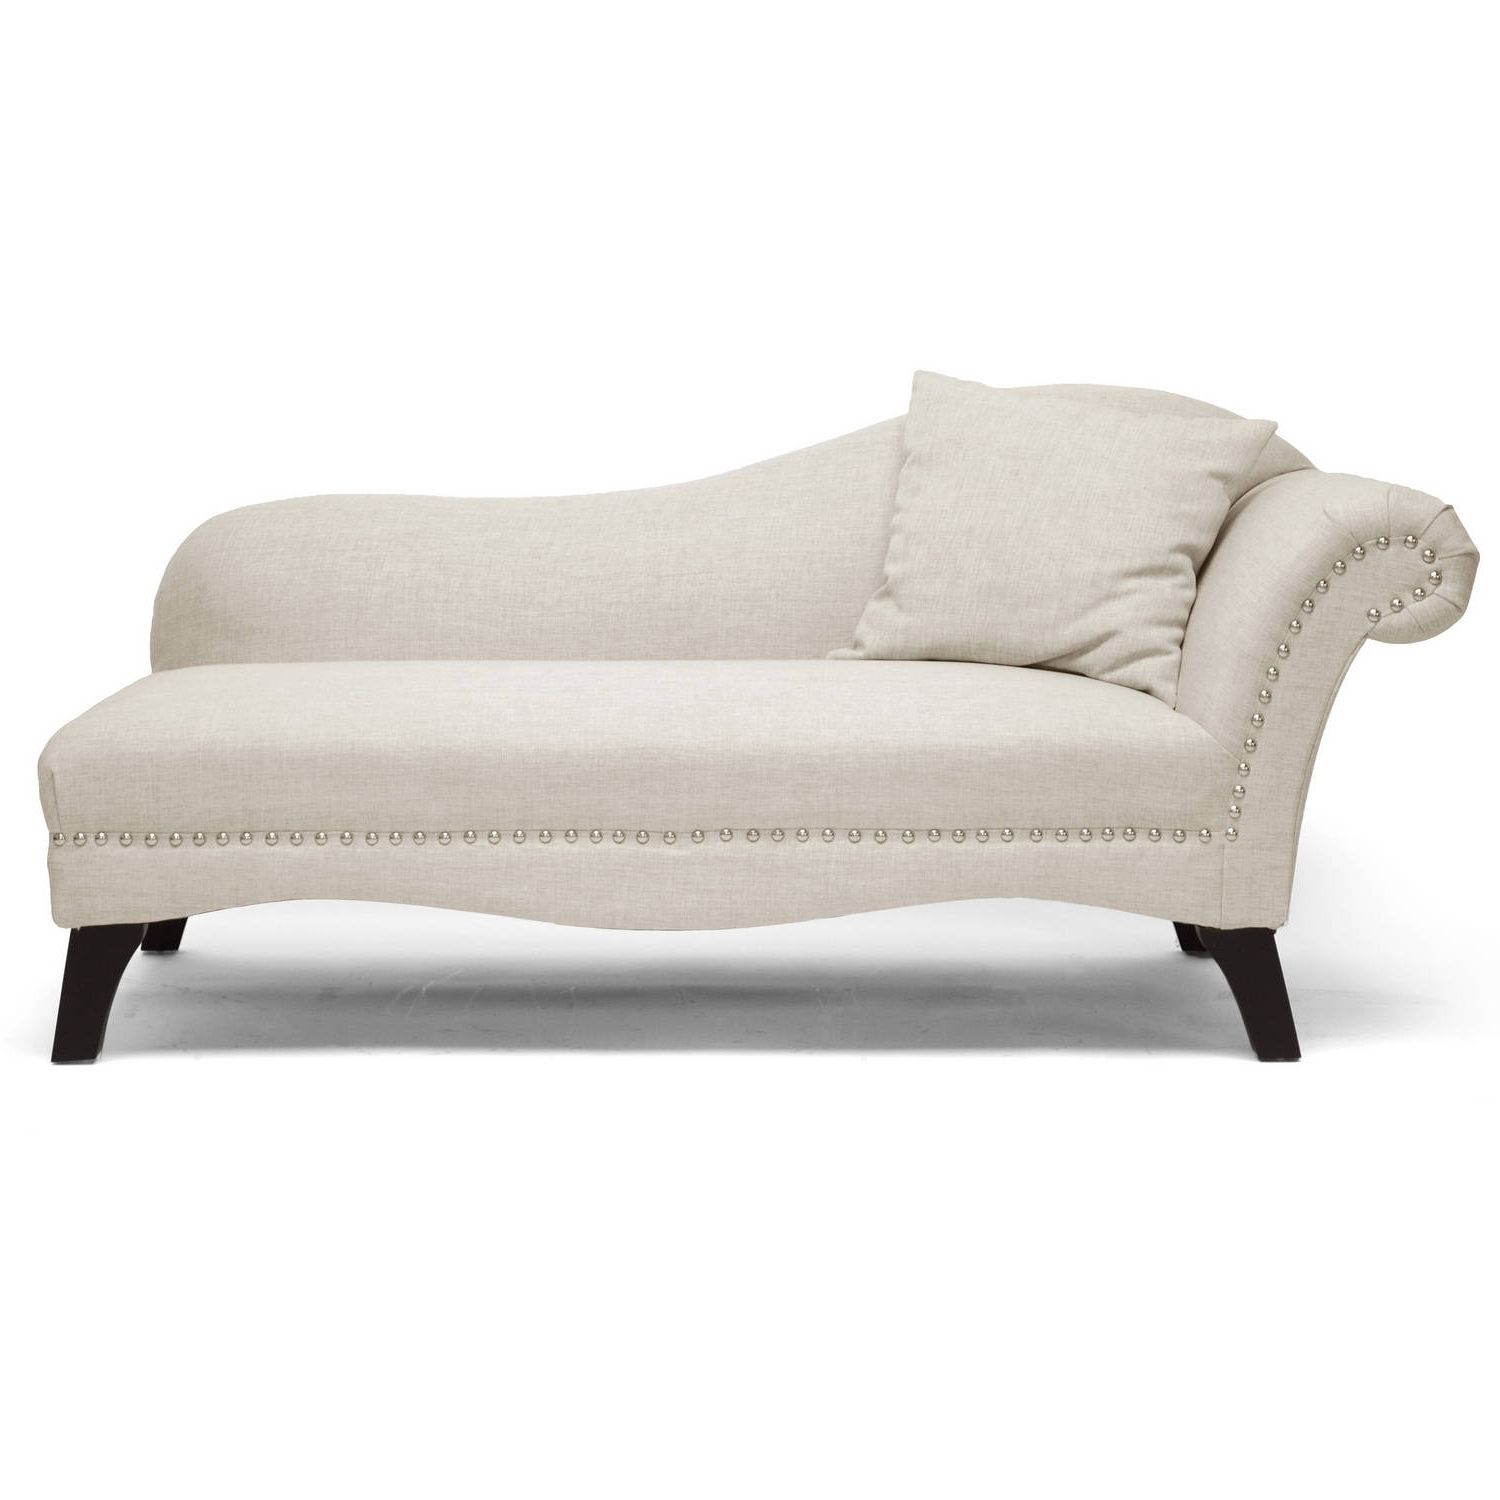 Favorite Chaise Lounge Sets In Chaise Lounges – Walmart (View 14 of 15)